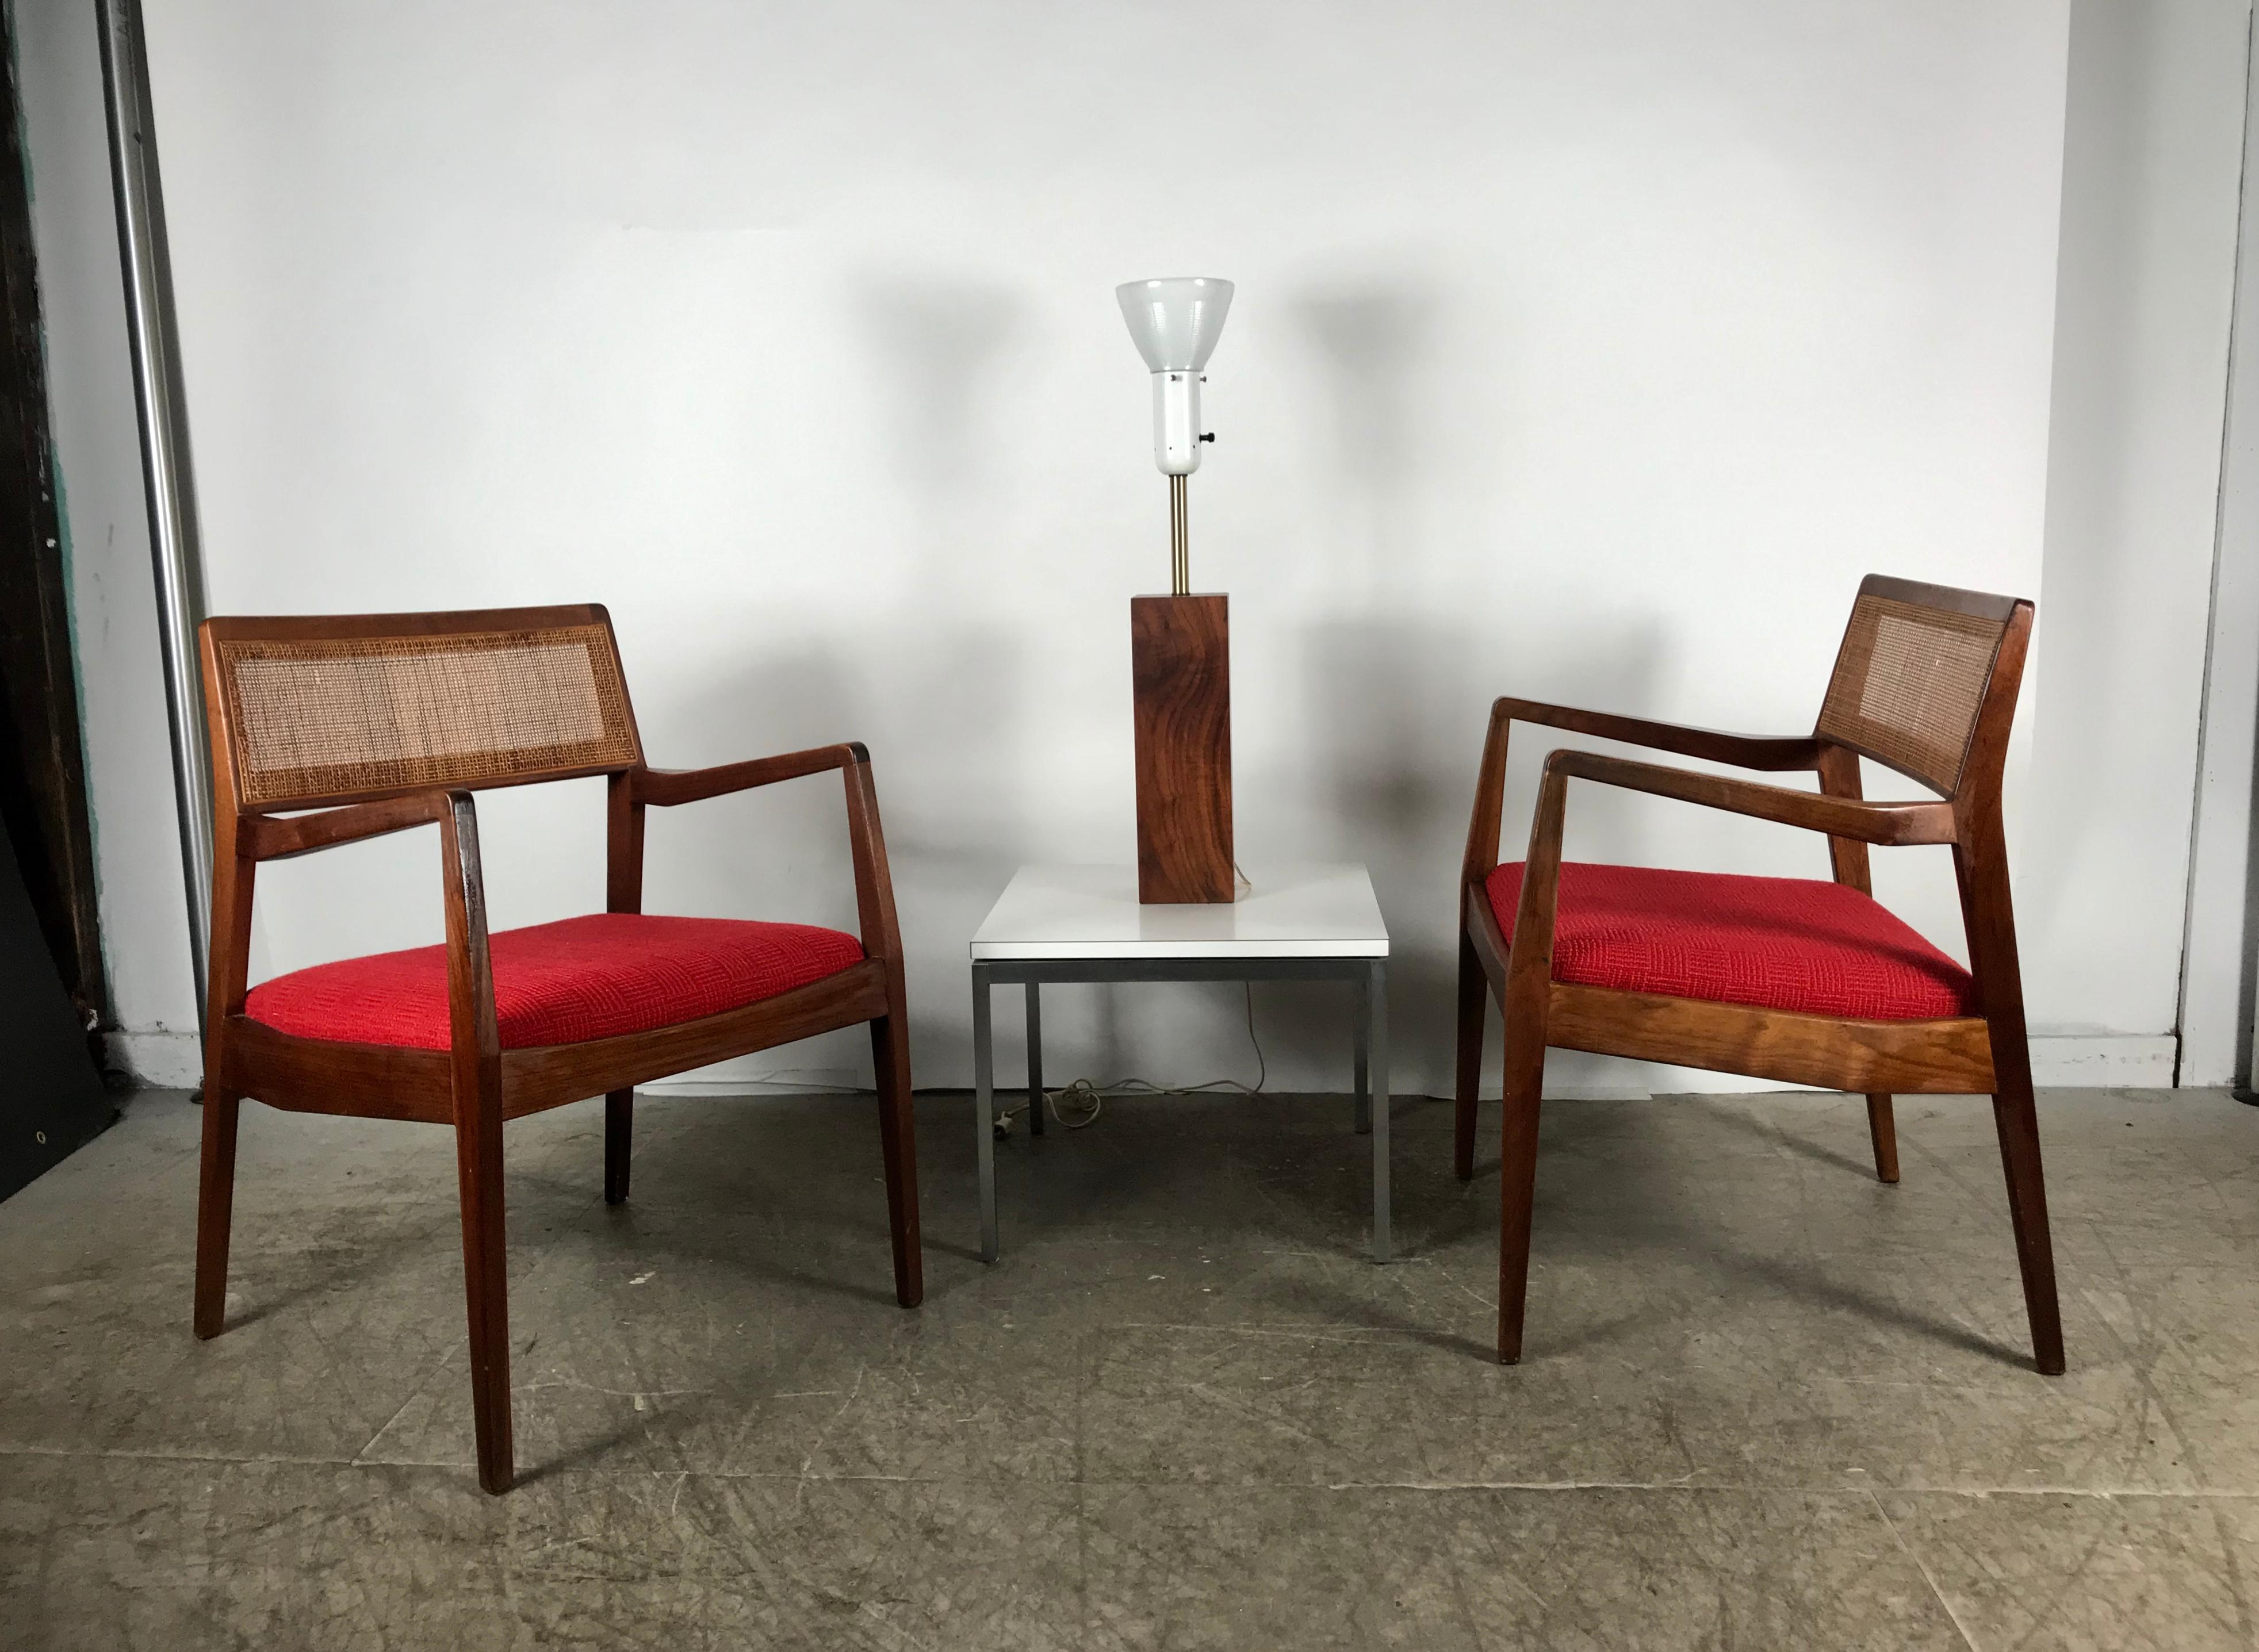 Matched pair of modernist Jens Risom walnut and caned back lounge chair, beautiful original condition, extremely comfortable, retains original red wool fabric seat, also retains original Jens Risom Design inc. Silk label.